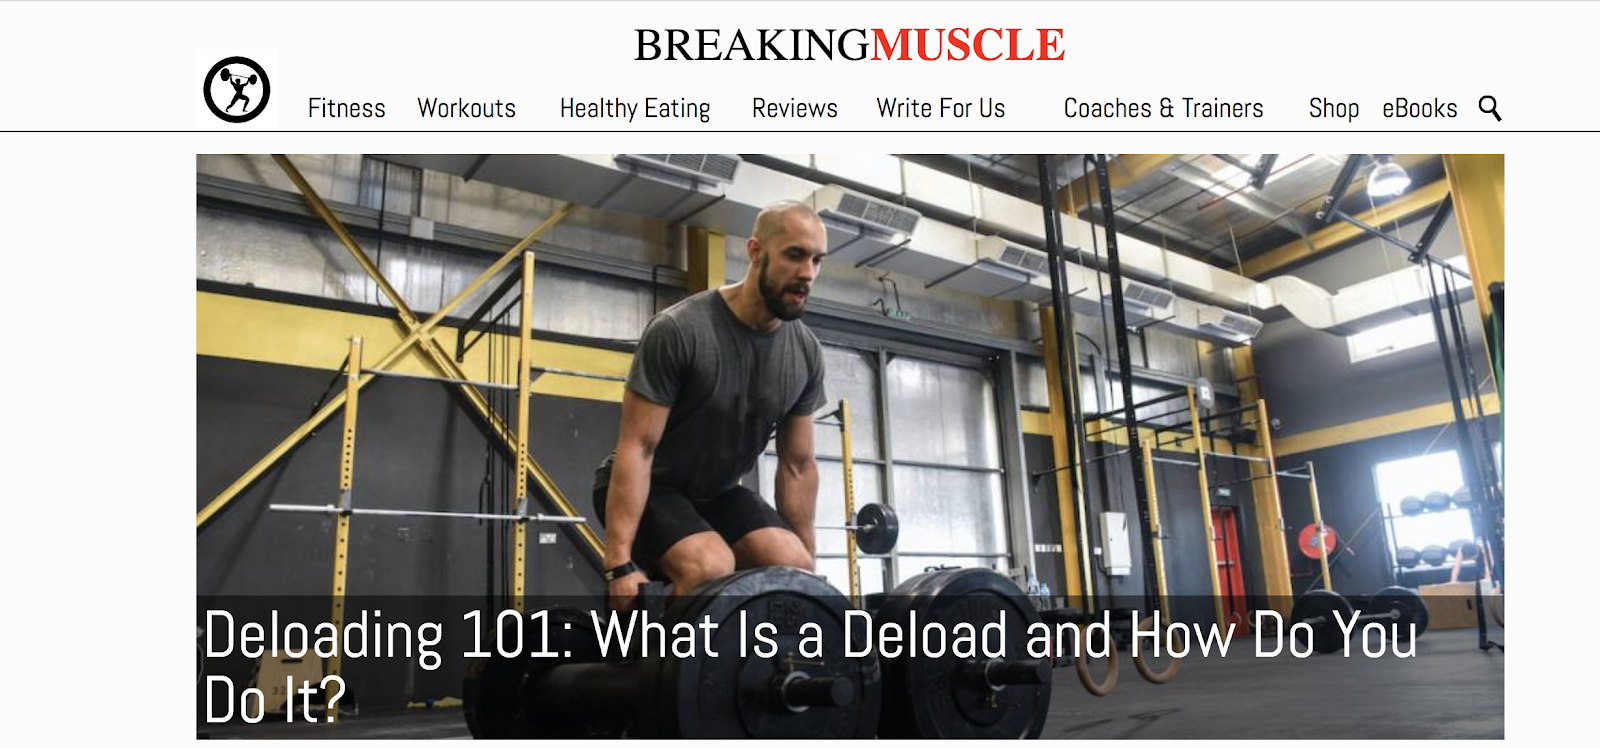 Breaking Muscle Example of How to Name a Blog Well (Screenshot)